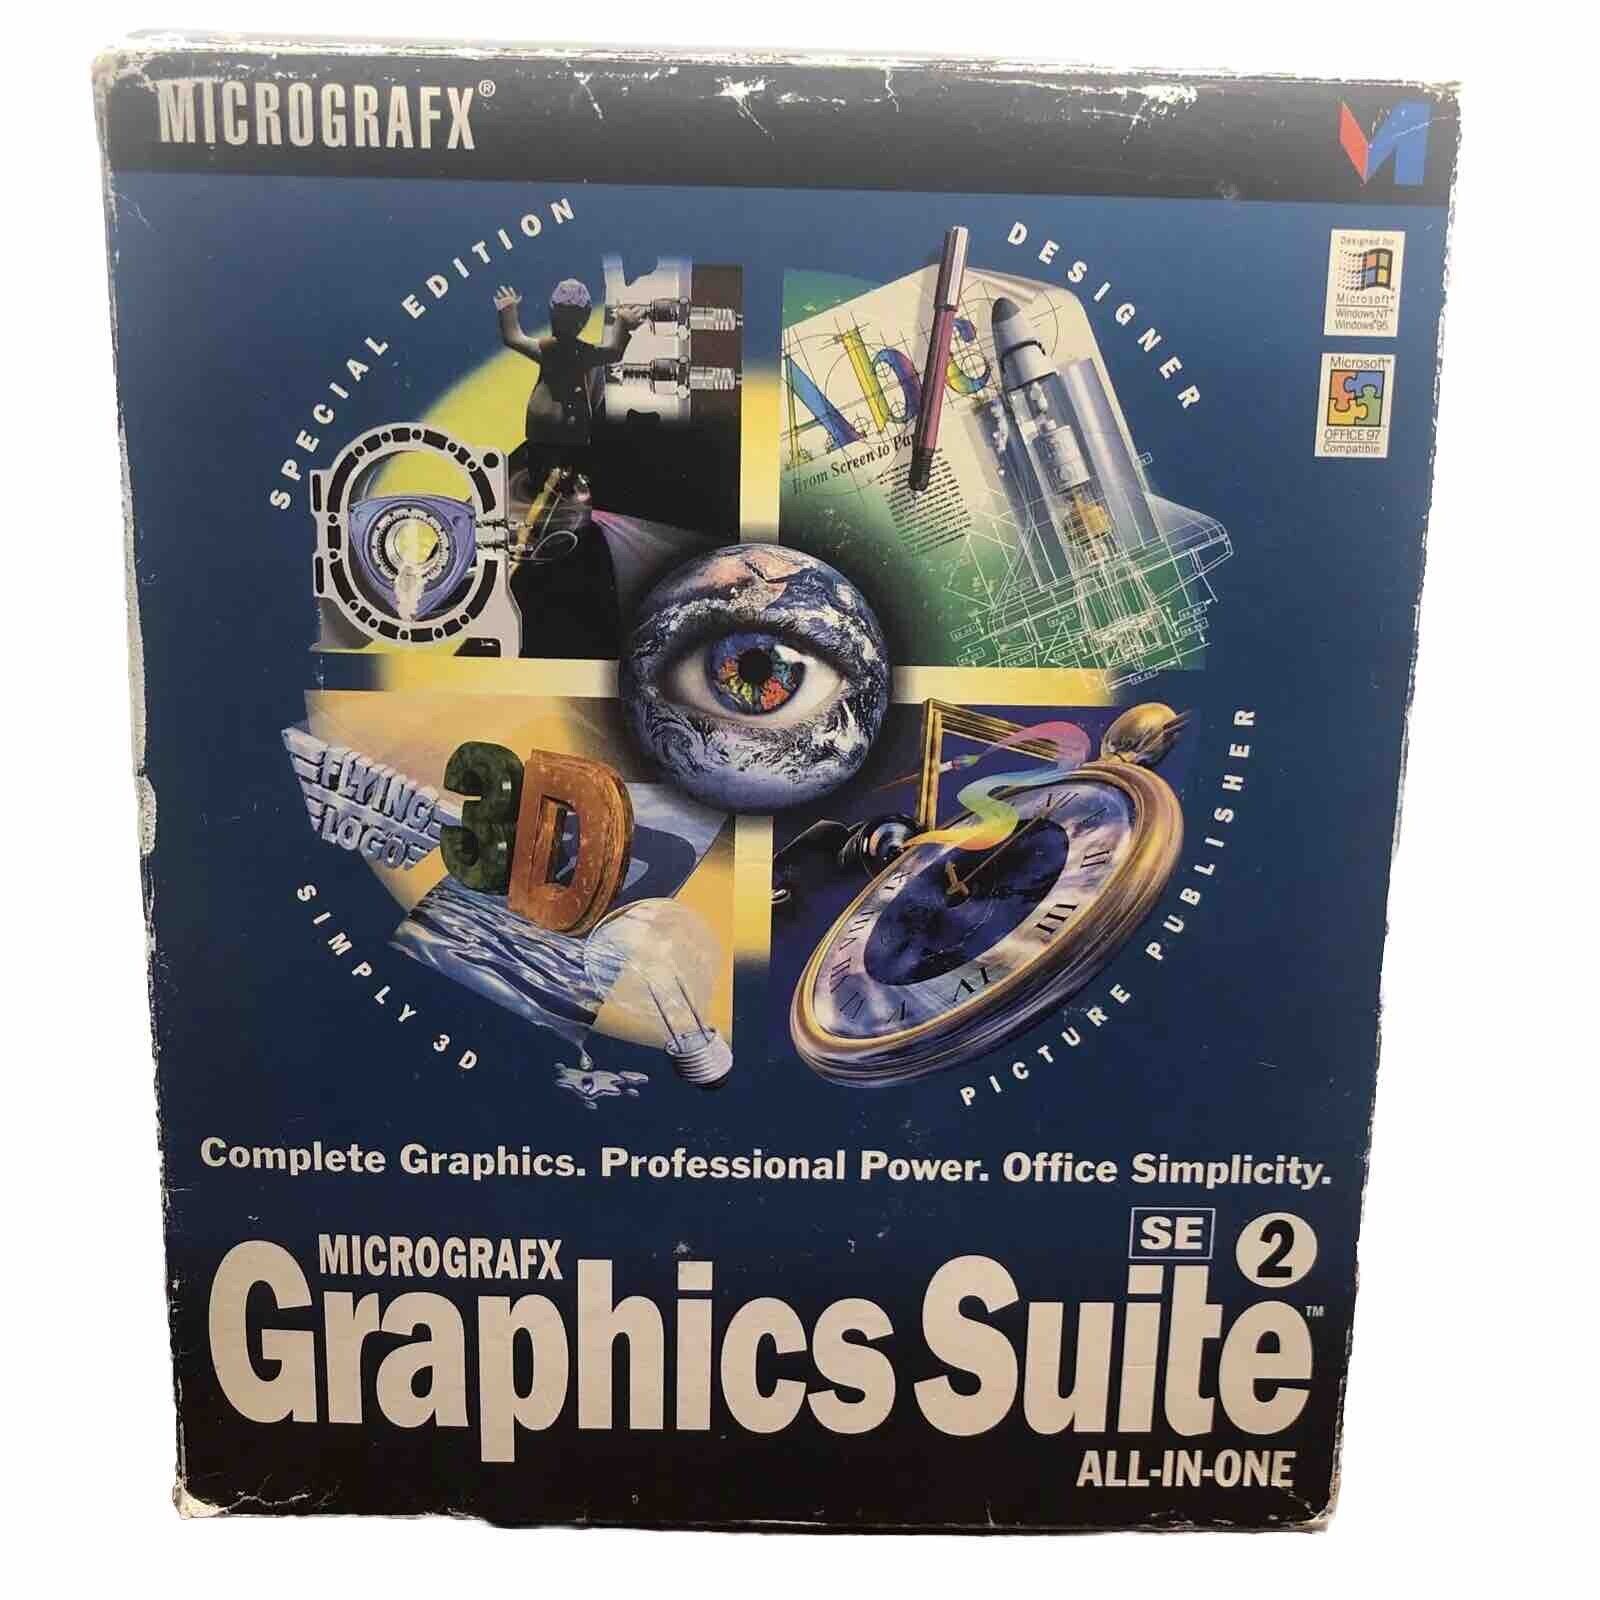 Micrografx Graphics Suite SE 2 All-In-One Vintage Windows 95 Software